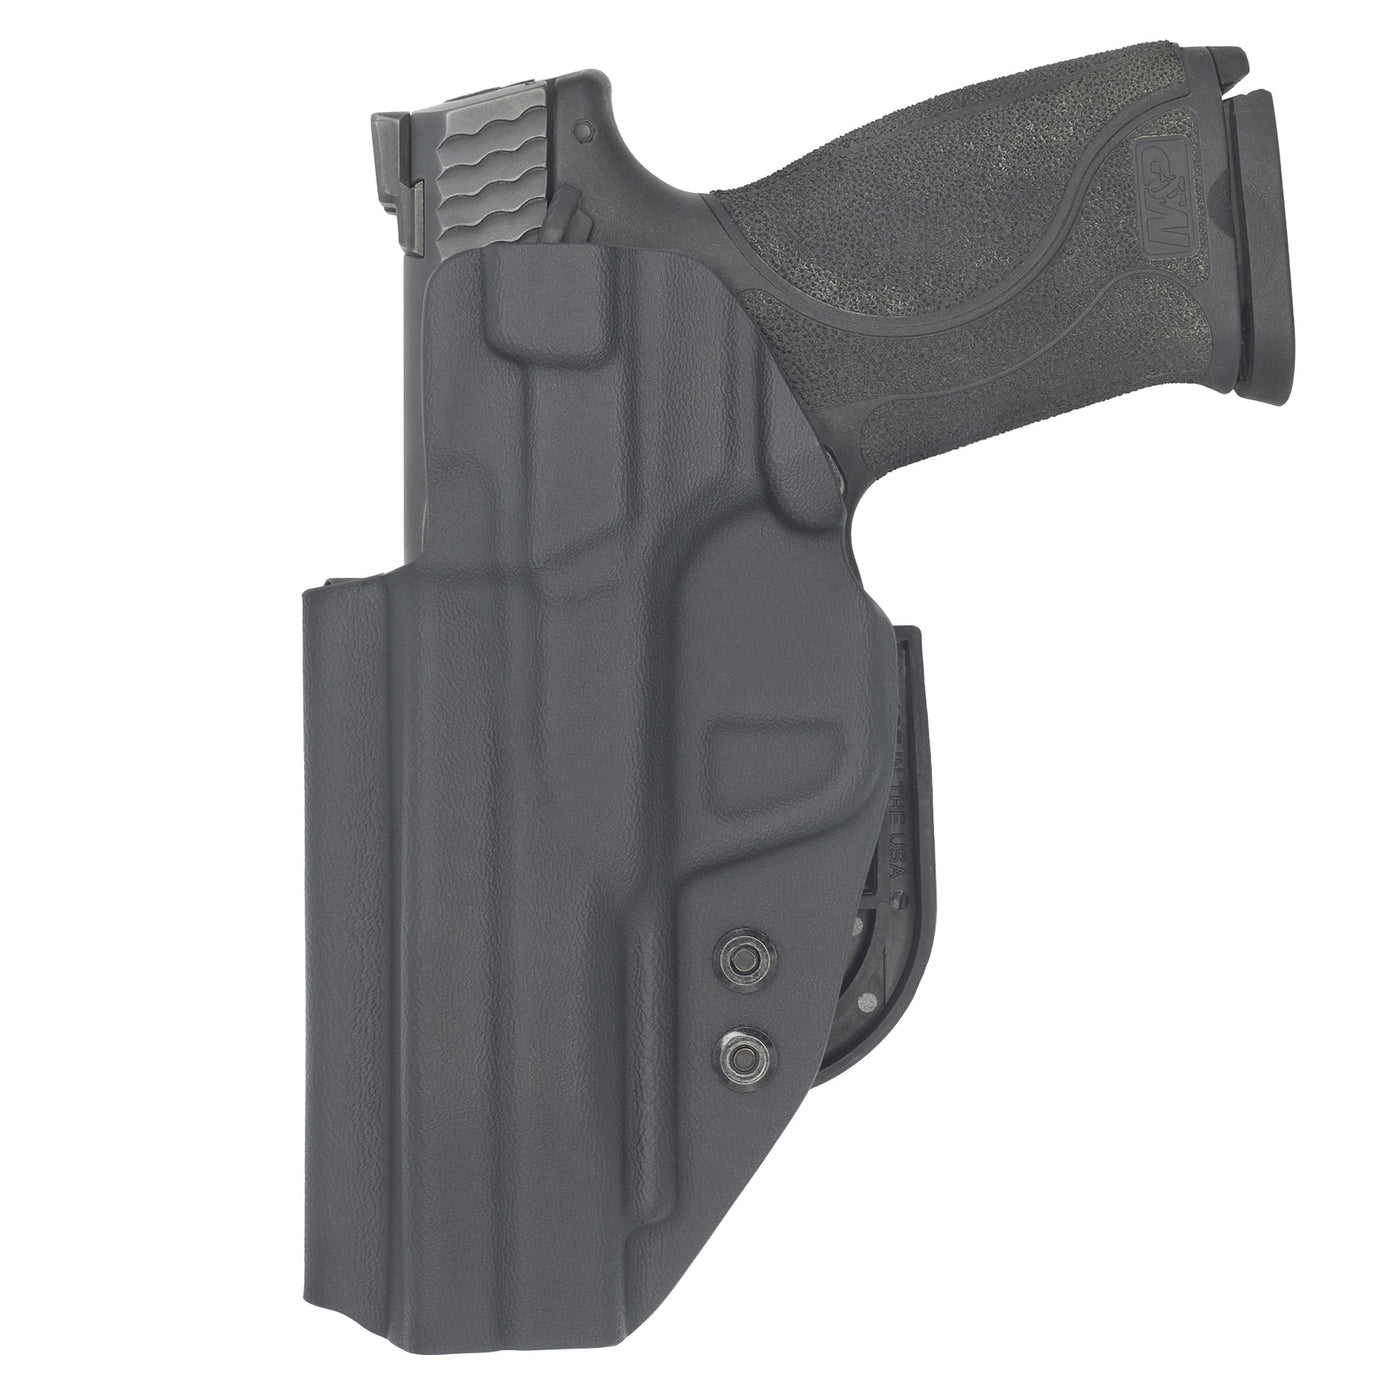 This is the C&G Holsters covert ALPHA series inside the waistband (IWB) holster for the Smith & Wesson M&P 9/40 4.25" rear view